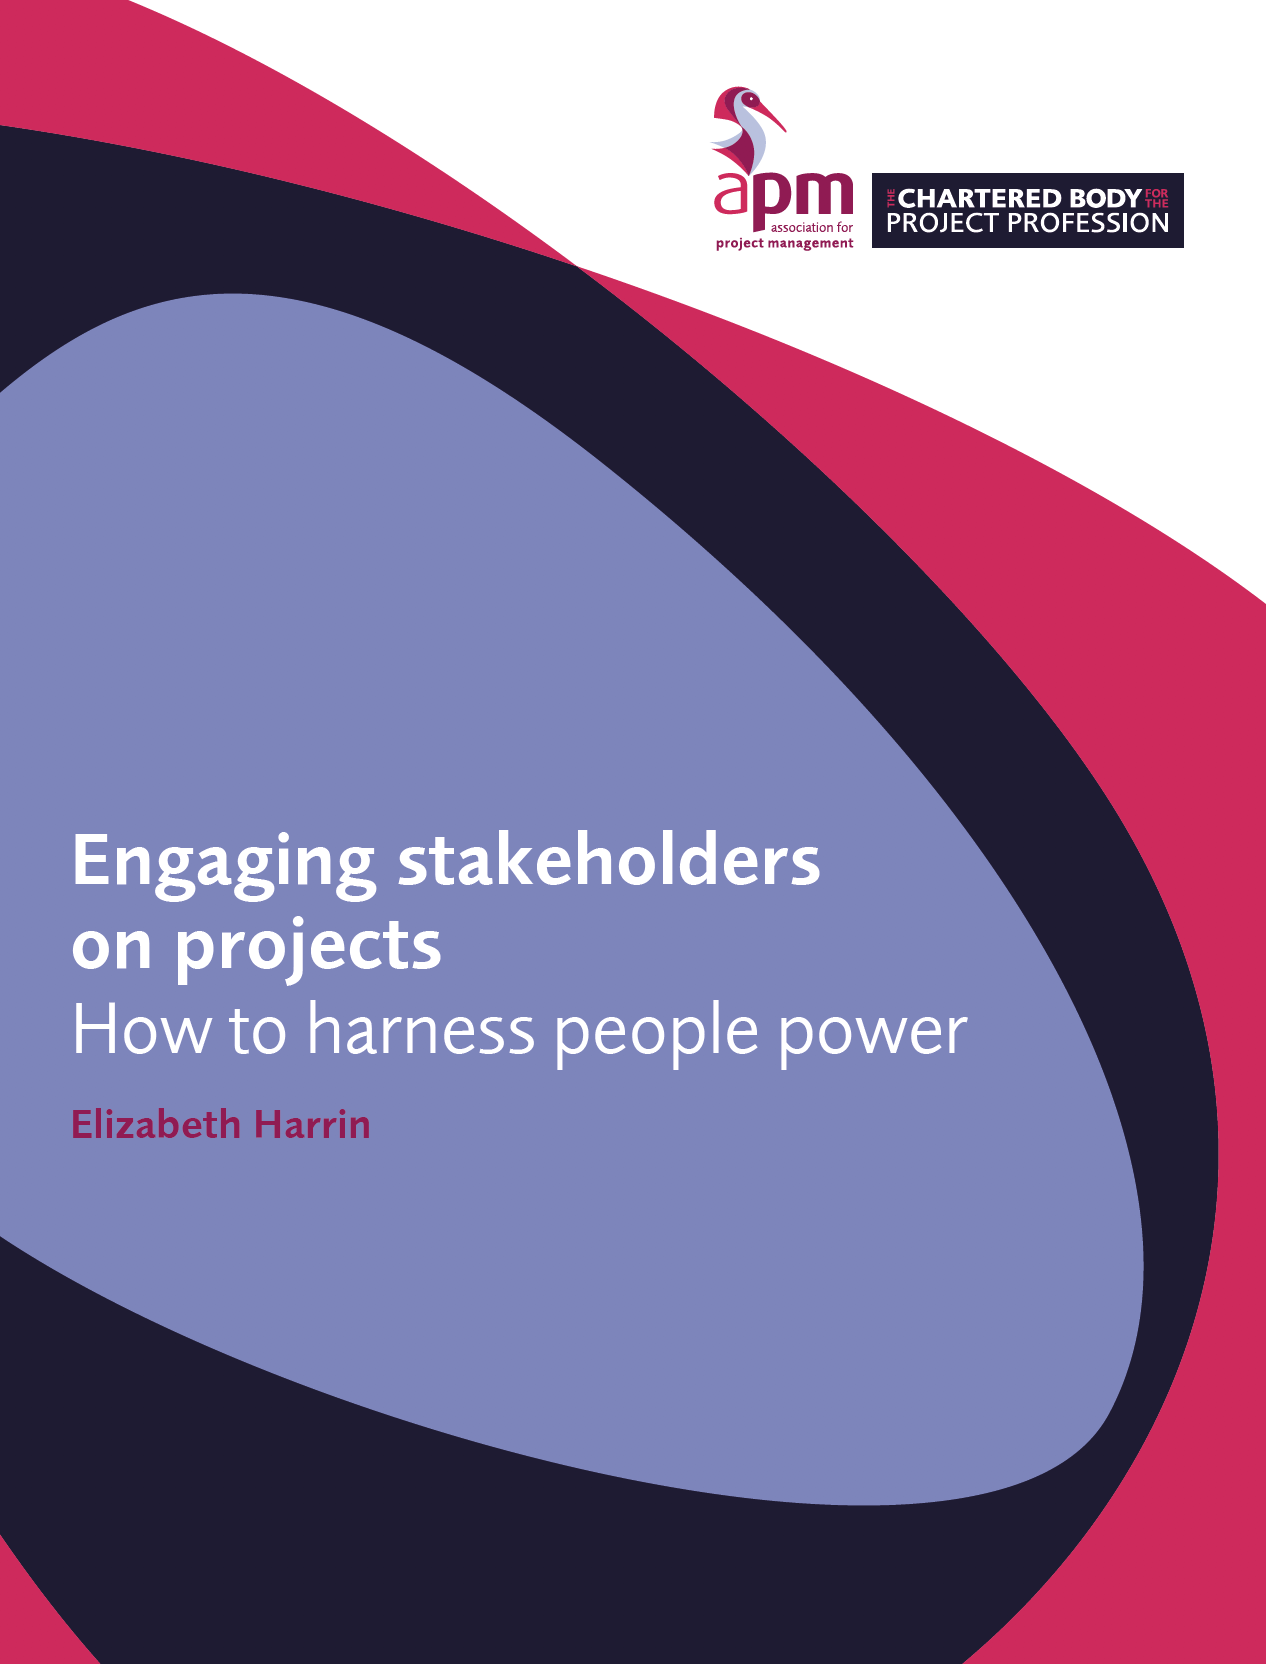 Engaging stakeholders on projects - How to harness people power 